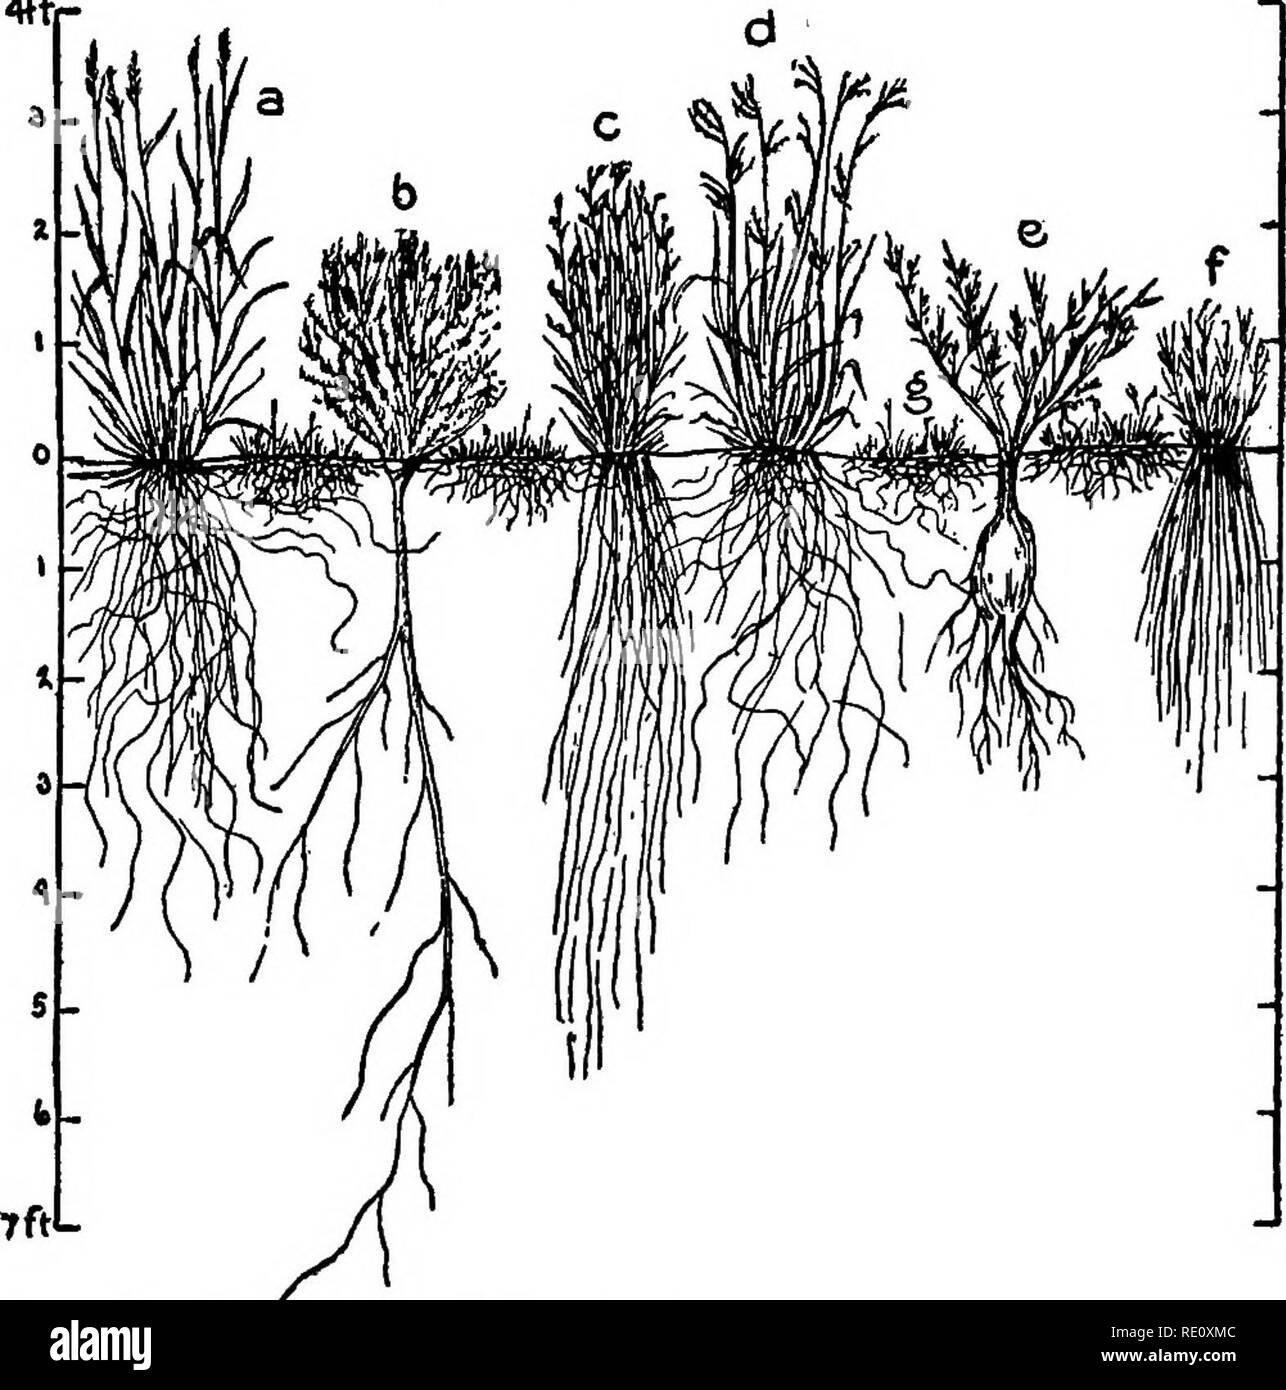 . Plant succession; an analysis of the development of vegetation. Plant ecology. THE BISECT. 433 and the consequent effect upon the course of succession. There is no question that investigations of this sort must become increasingly frequent in the study of development, and that the bisect will become a regular method of investi- gation and record (c/. Weaver, 1915, 1916). 4ftr k. Fig. 49.—^Bisect of sandhills mixed association in eastern Colo- rado, a, CalamovUfa longifolia; h, Artemisia filifolia; e, An- dropogon scopanus; d, A. hallii; e, Ipomoea leptophyUa; f, Aristida purpurea; g. Boutdou Stock Photo